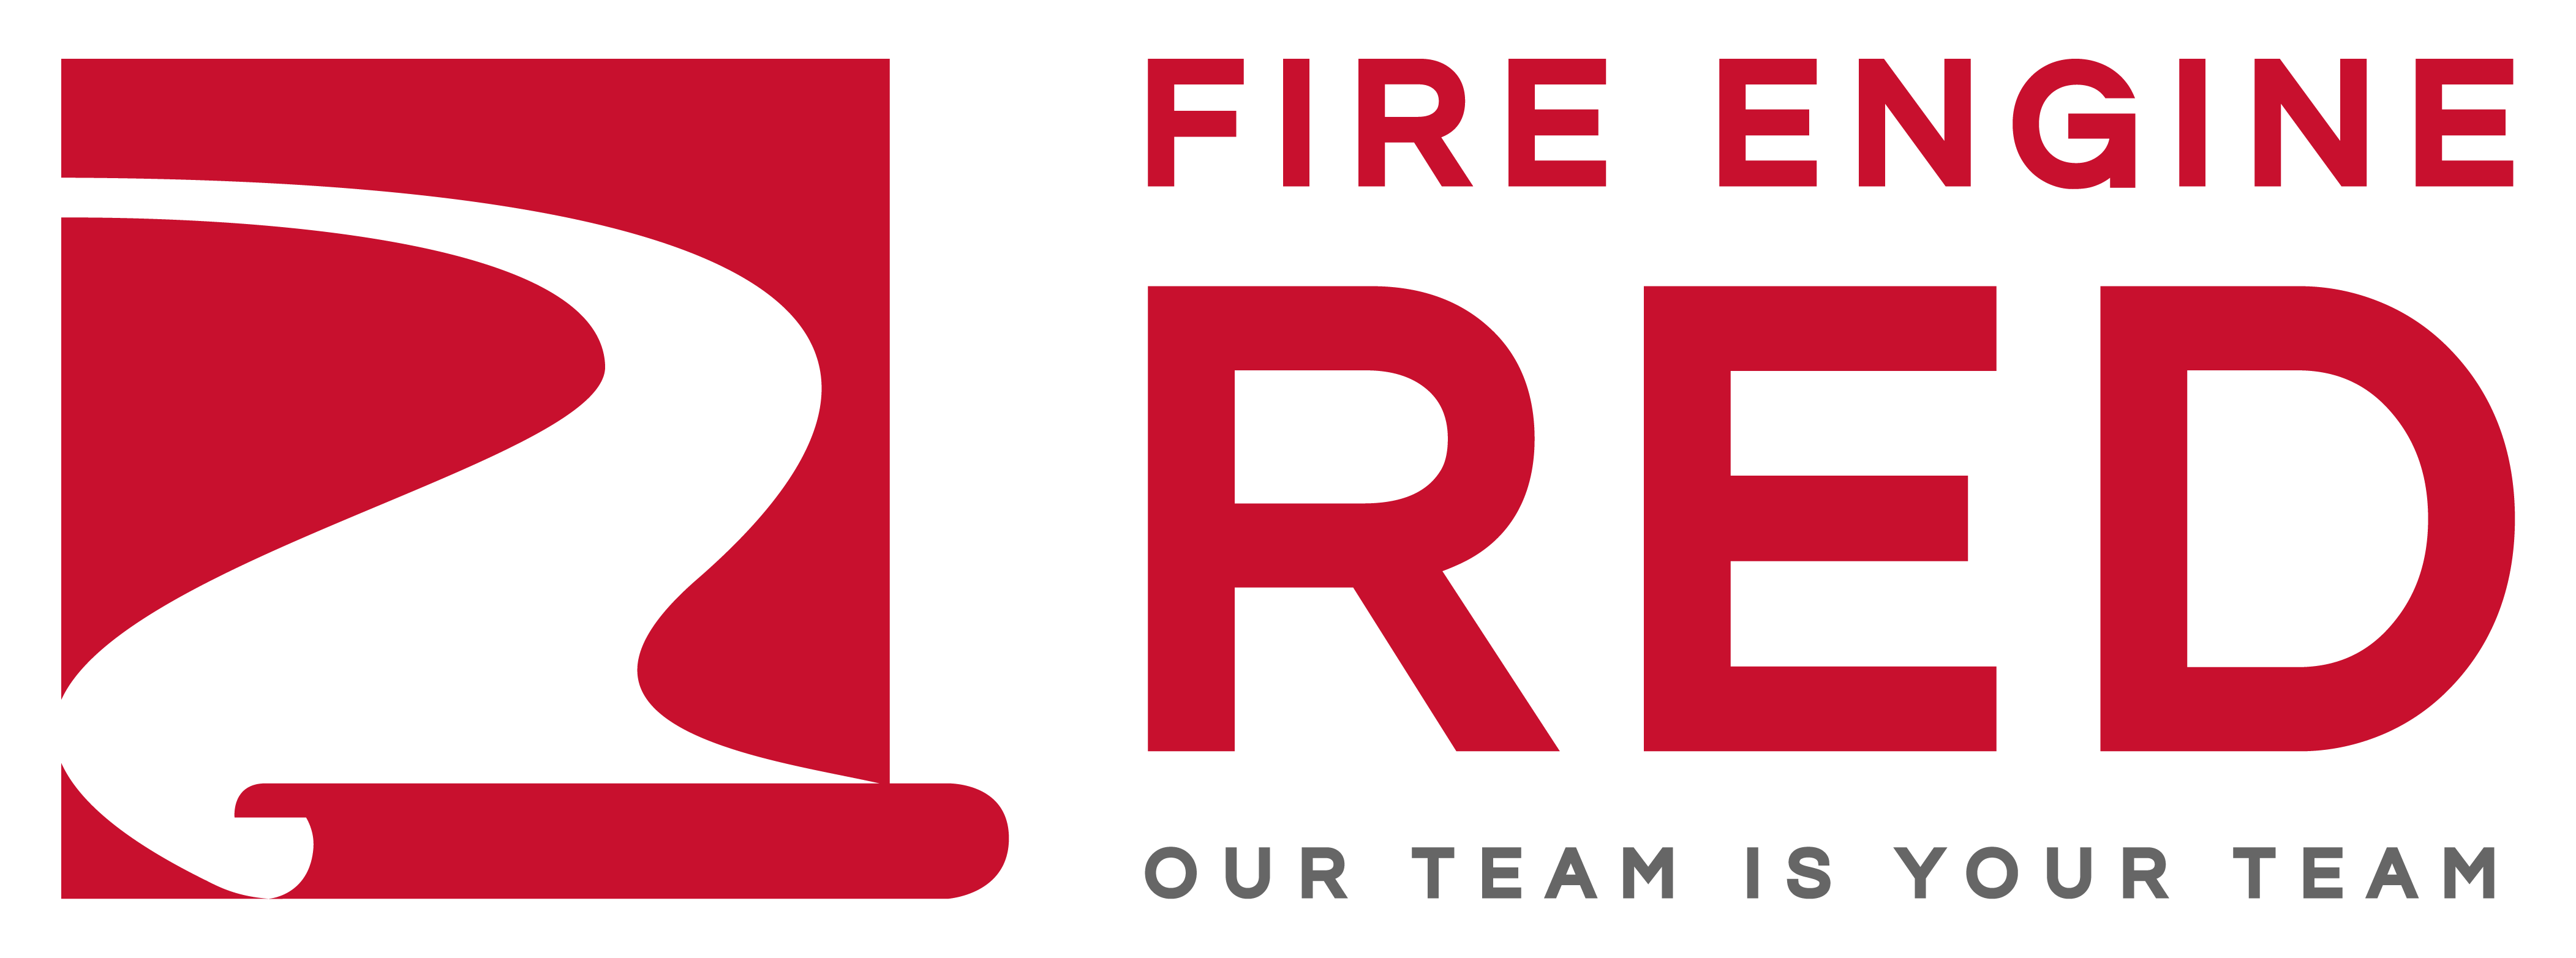 fire-engine-red-logo